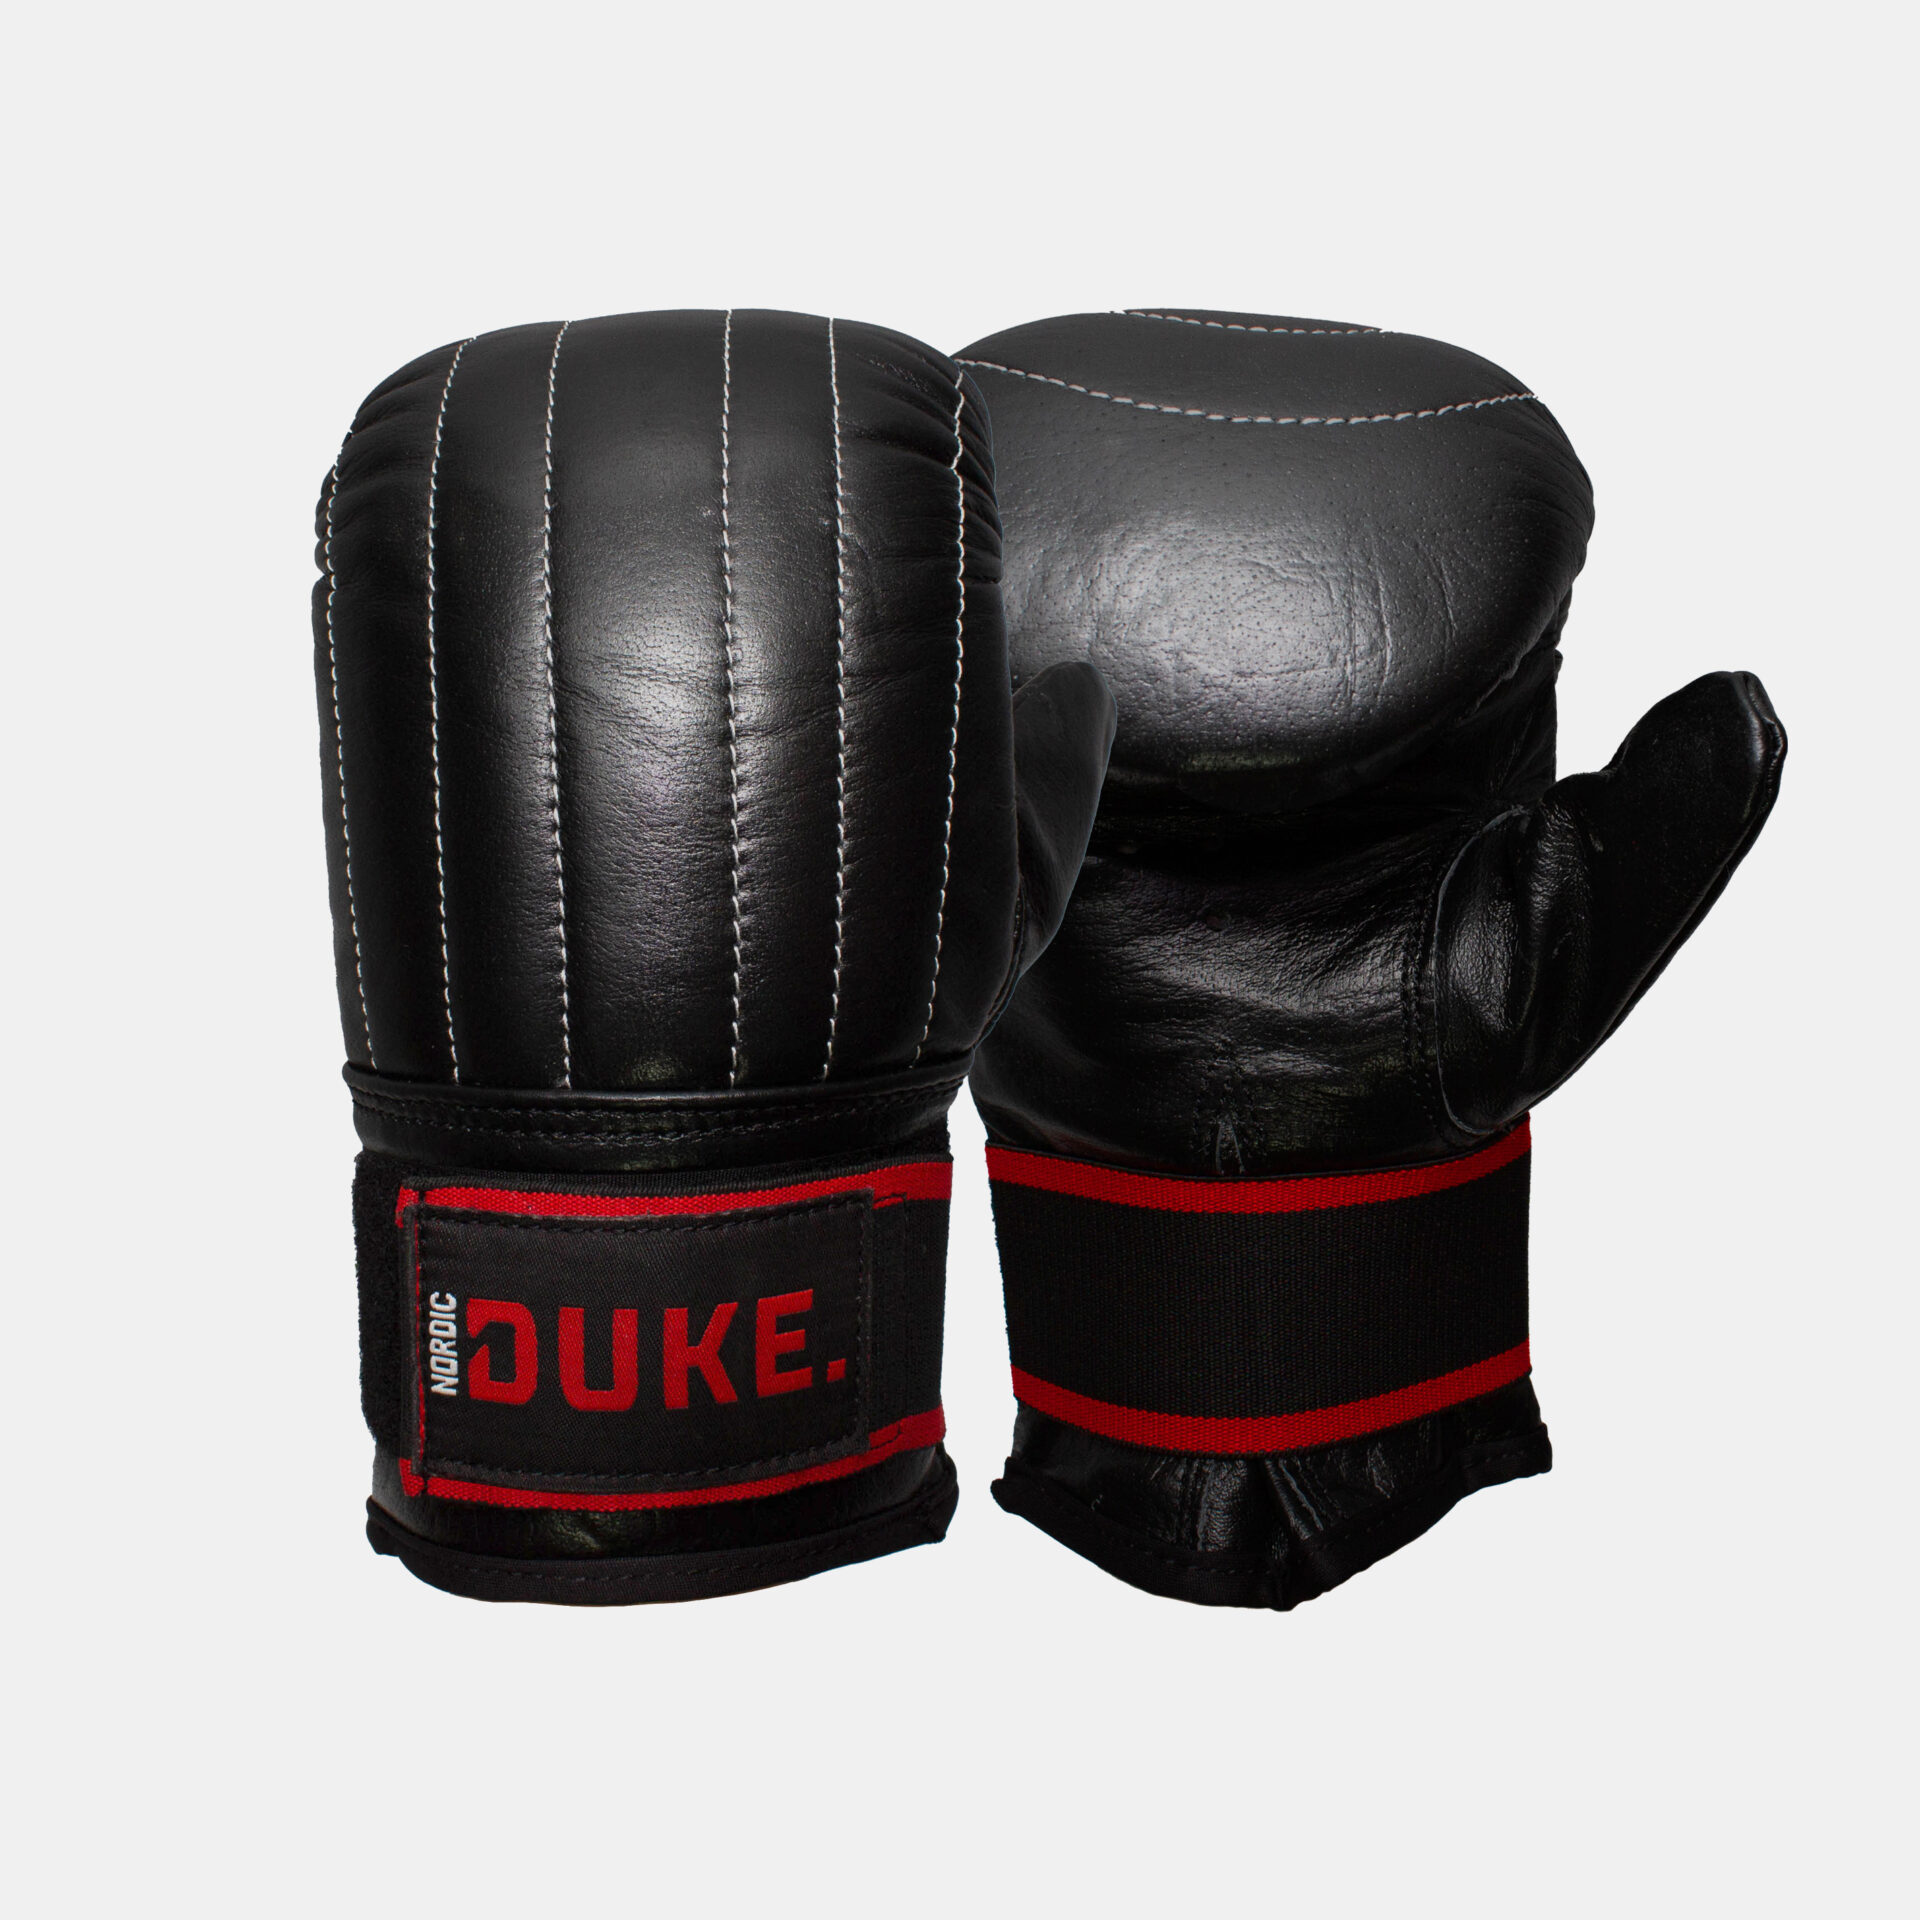 Nordic Duke® Bag Gloves made of real leather. Populat bag mitts for bag training!